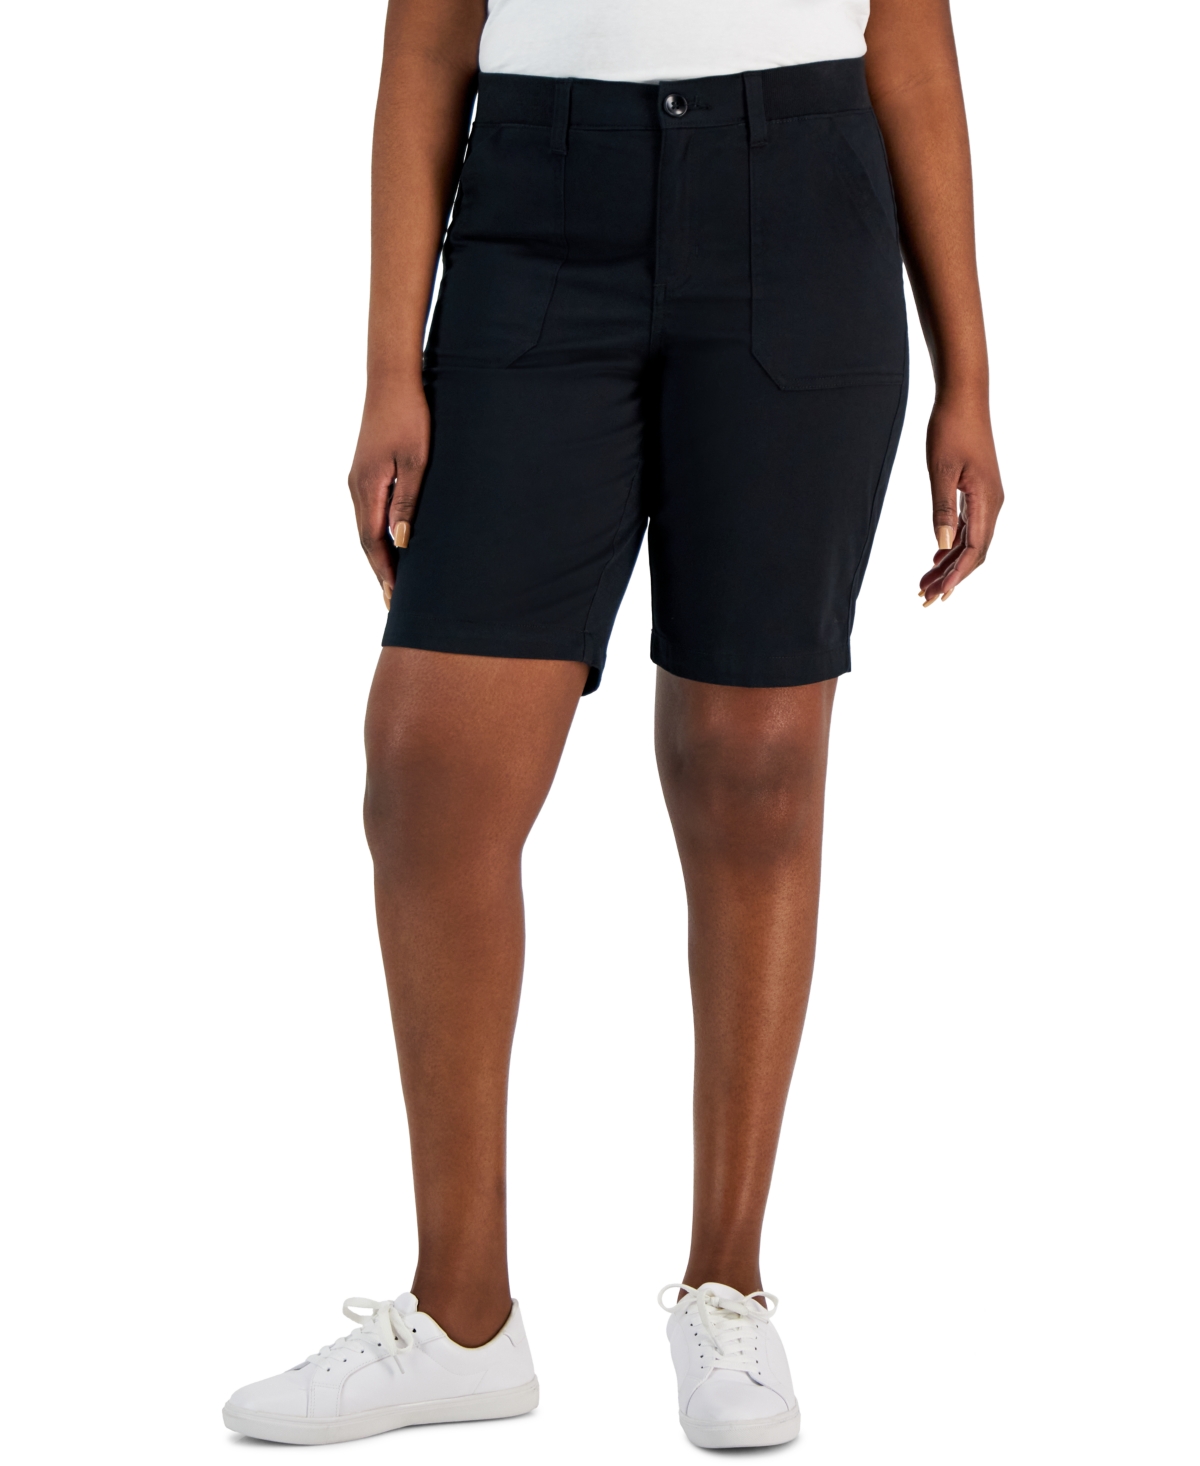 Women's Mid Rise Stretch-Waist Shorts, Created for Macy's - Intrepid Blue